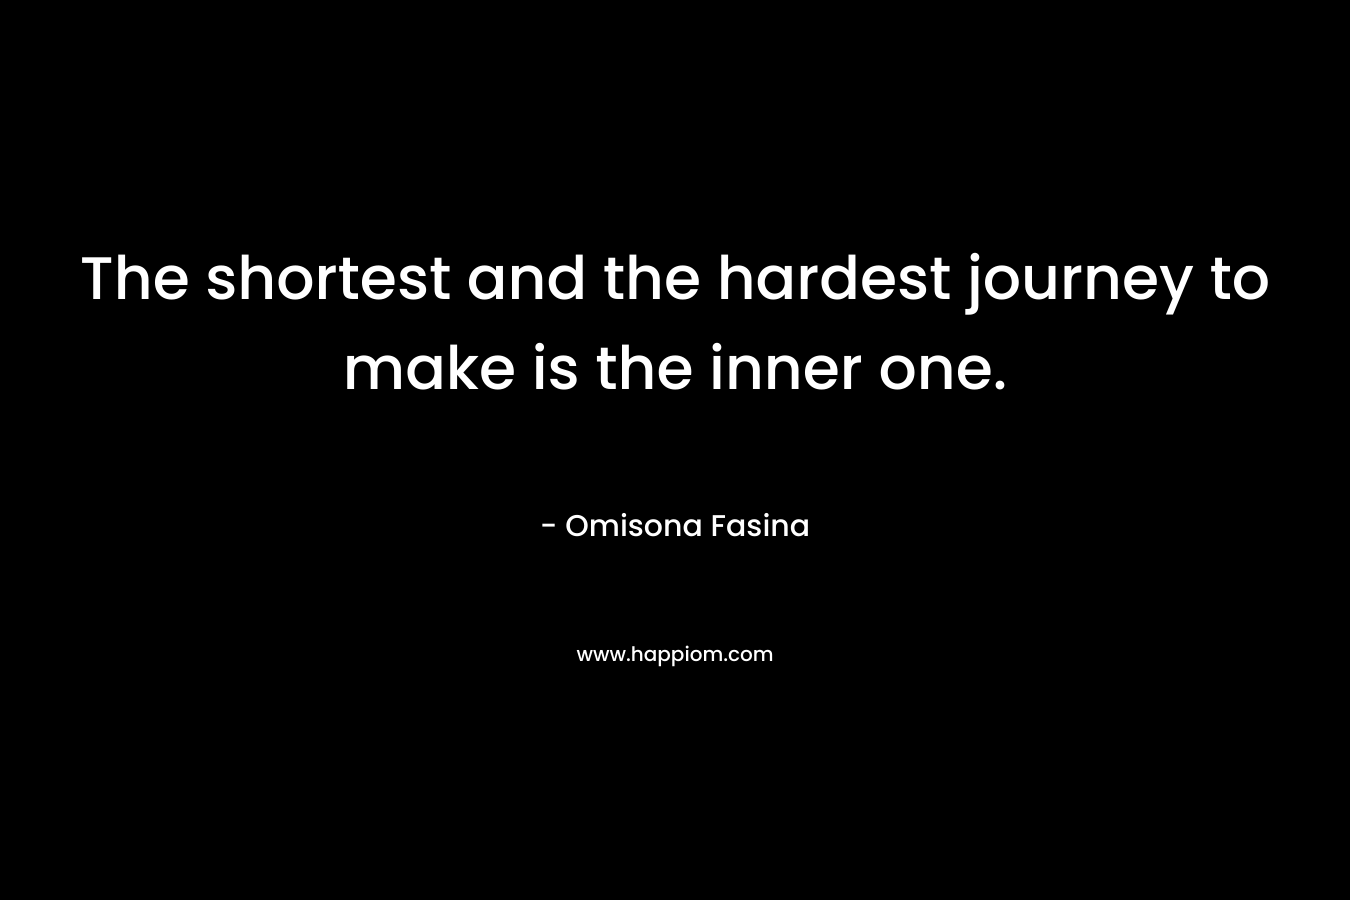 The shortest and the hardest journey to make is the inner one. – Omisona Fasina